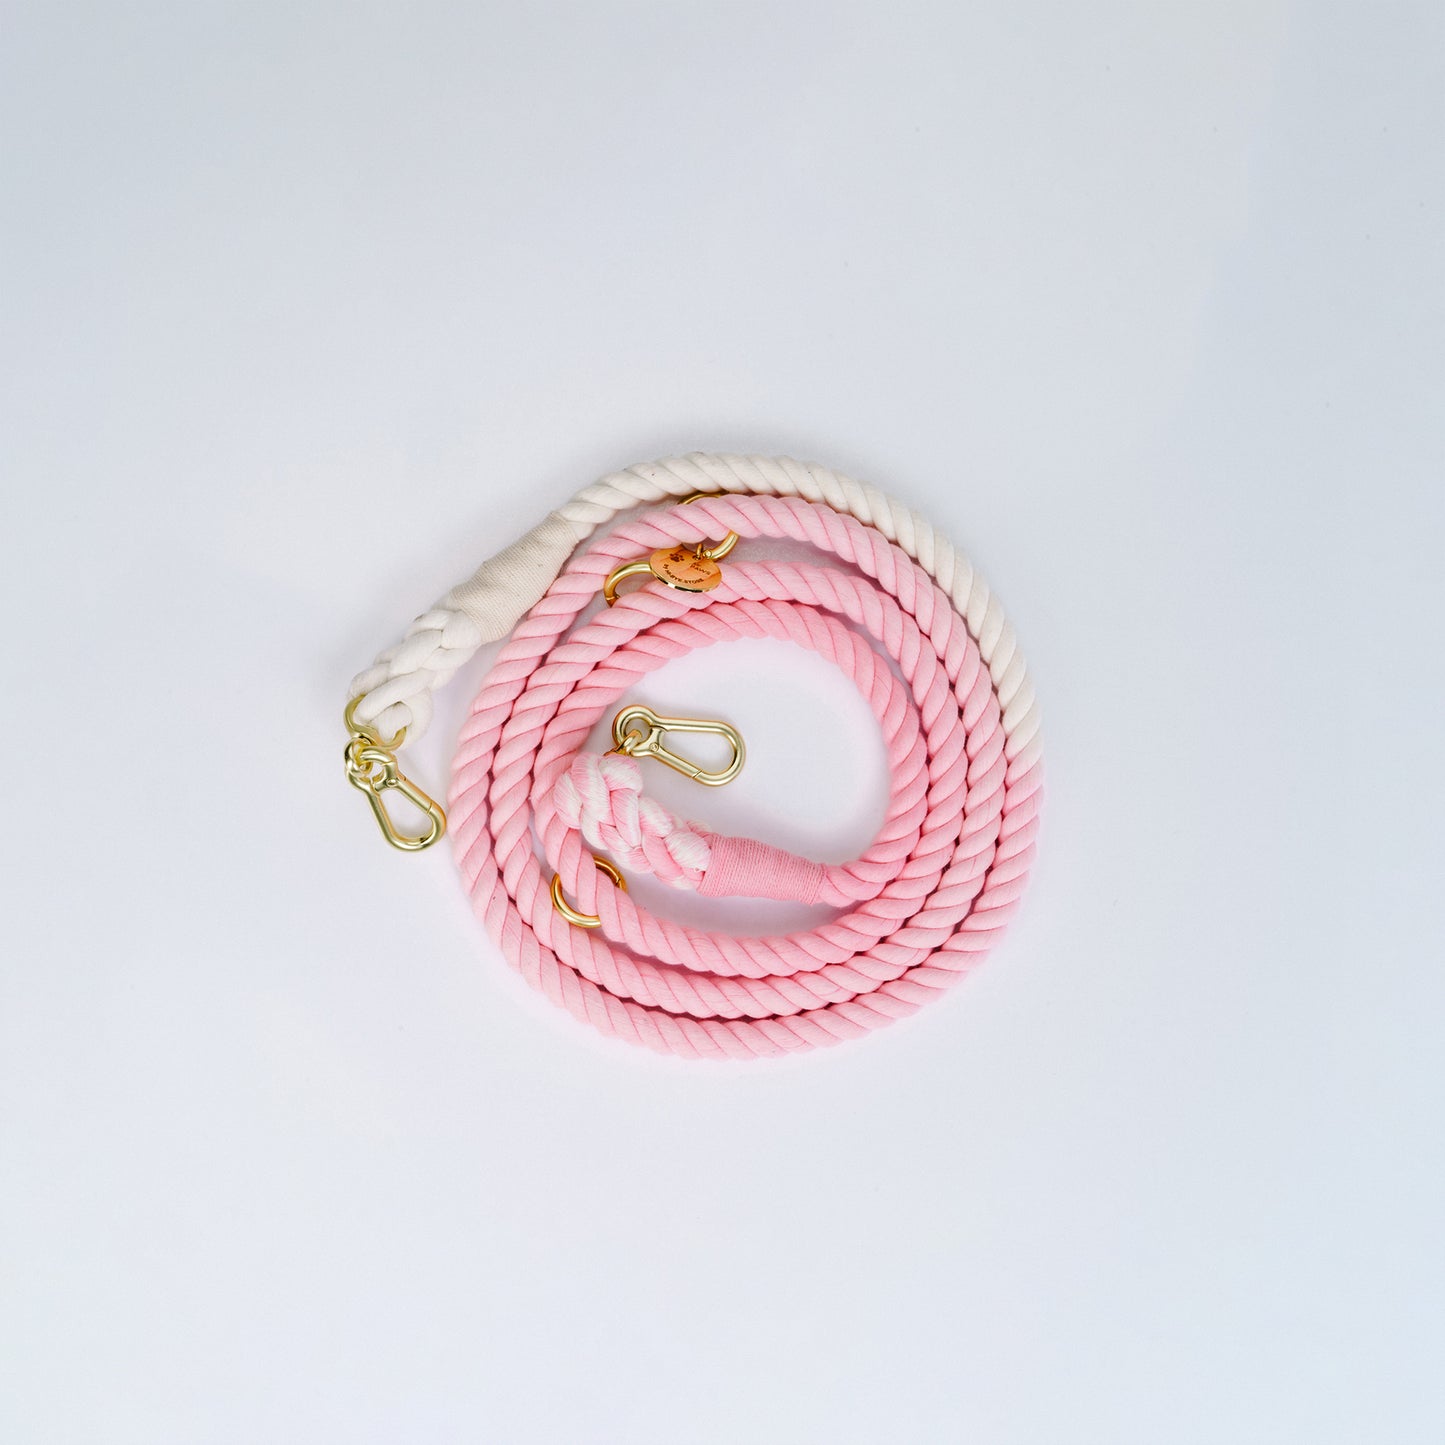 Ombre Rope Dog Leash, Adjustable